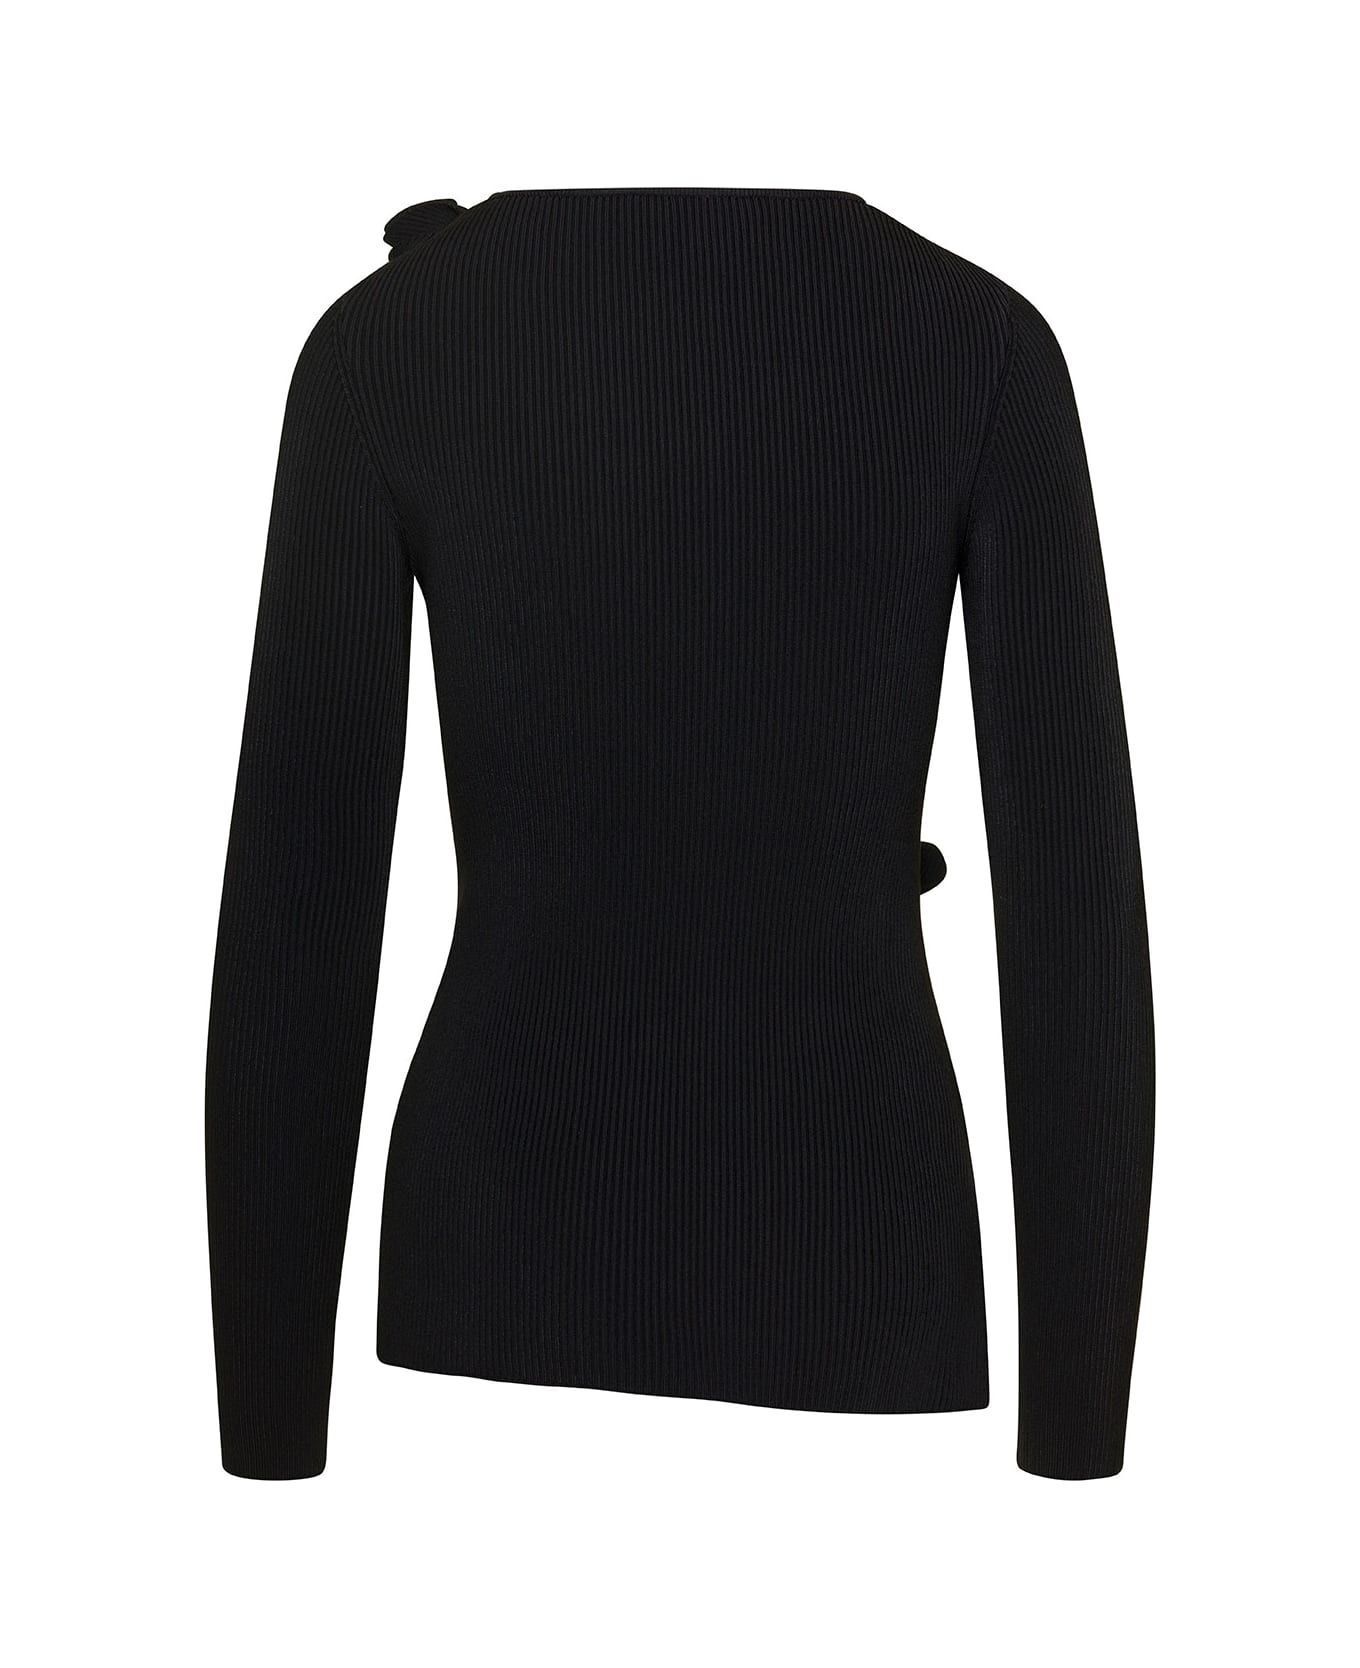 Coperni Black Ribbed Top With Cut-out And Rose Appliques In Stretch Viscose Woman - Black ニットウェア